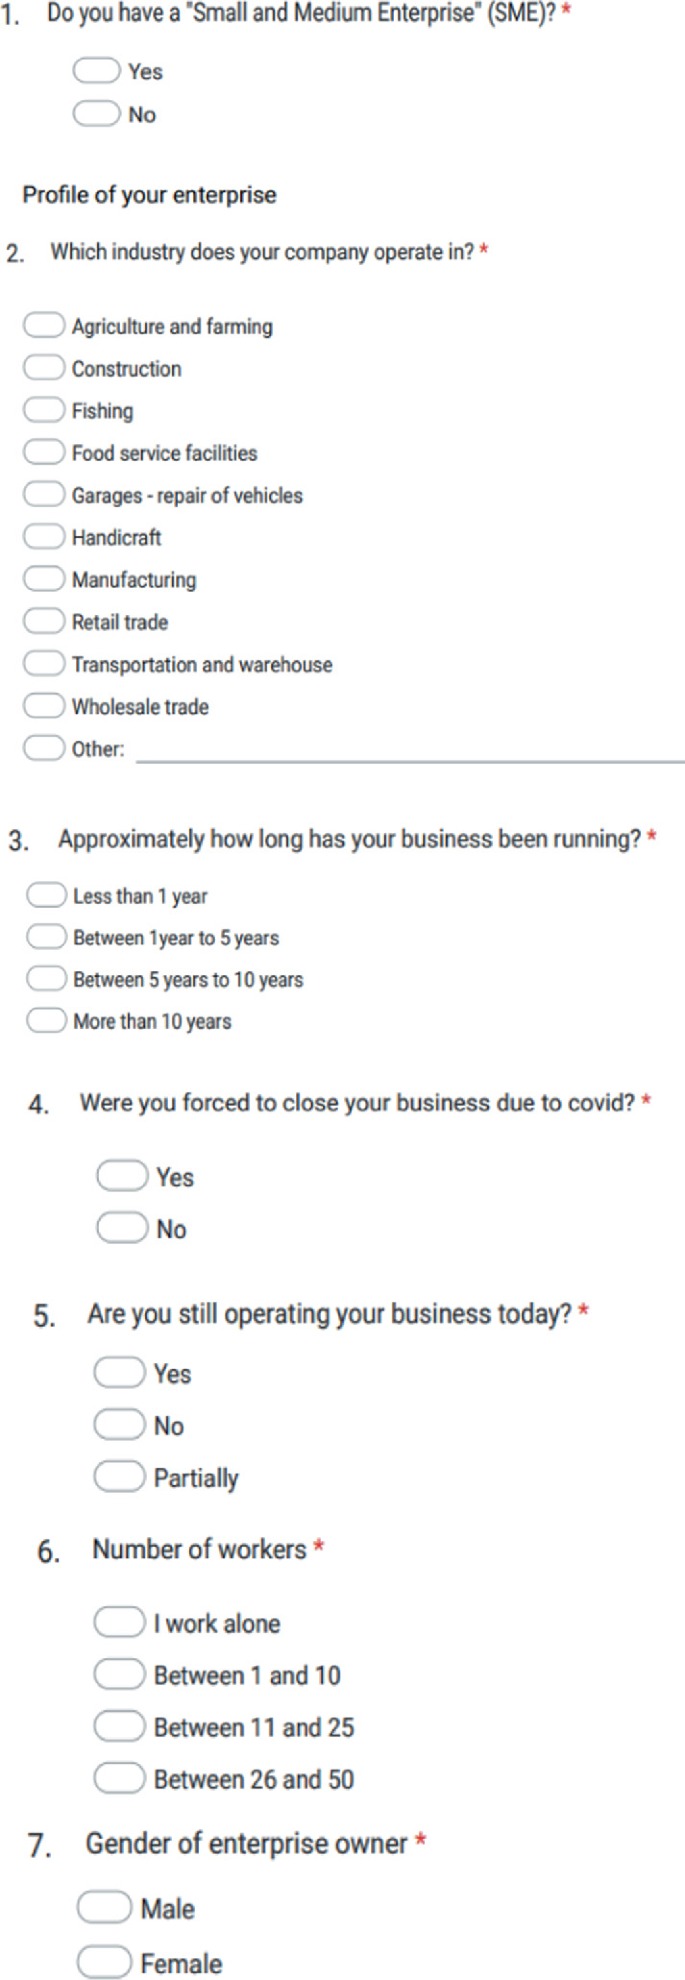 The screenshot of a questionnaire with 7 questions asking for the following details. 1. Profile of the enterprise. 2. Industry that the company operates in. 3. Tenure of the business. 4. Closure due to COVID. 5. Business still operational or not 6. The number of workers. 7. Gender of the owner.